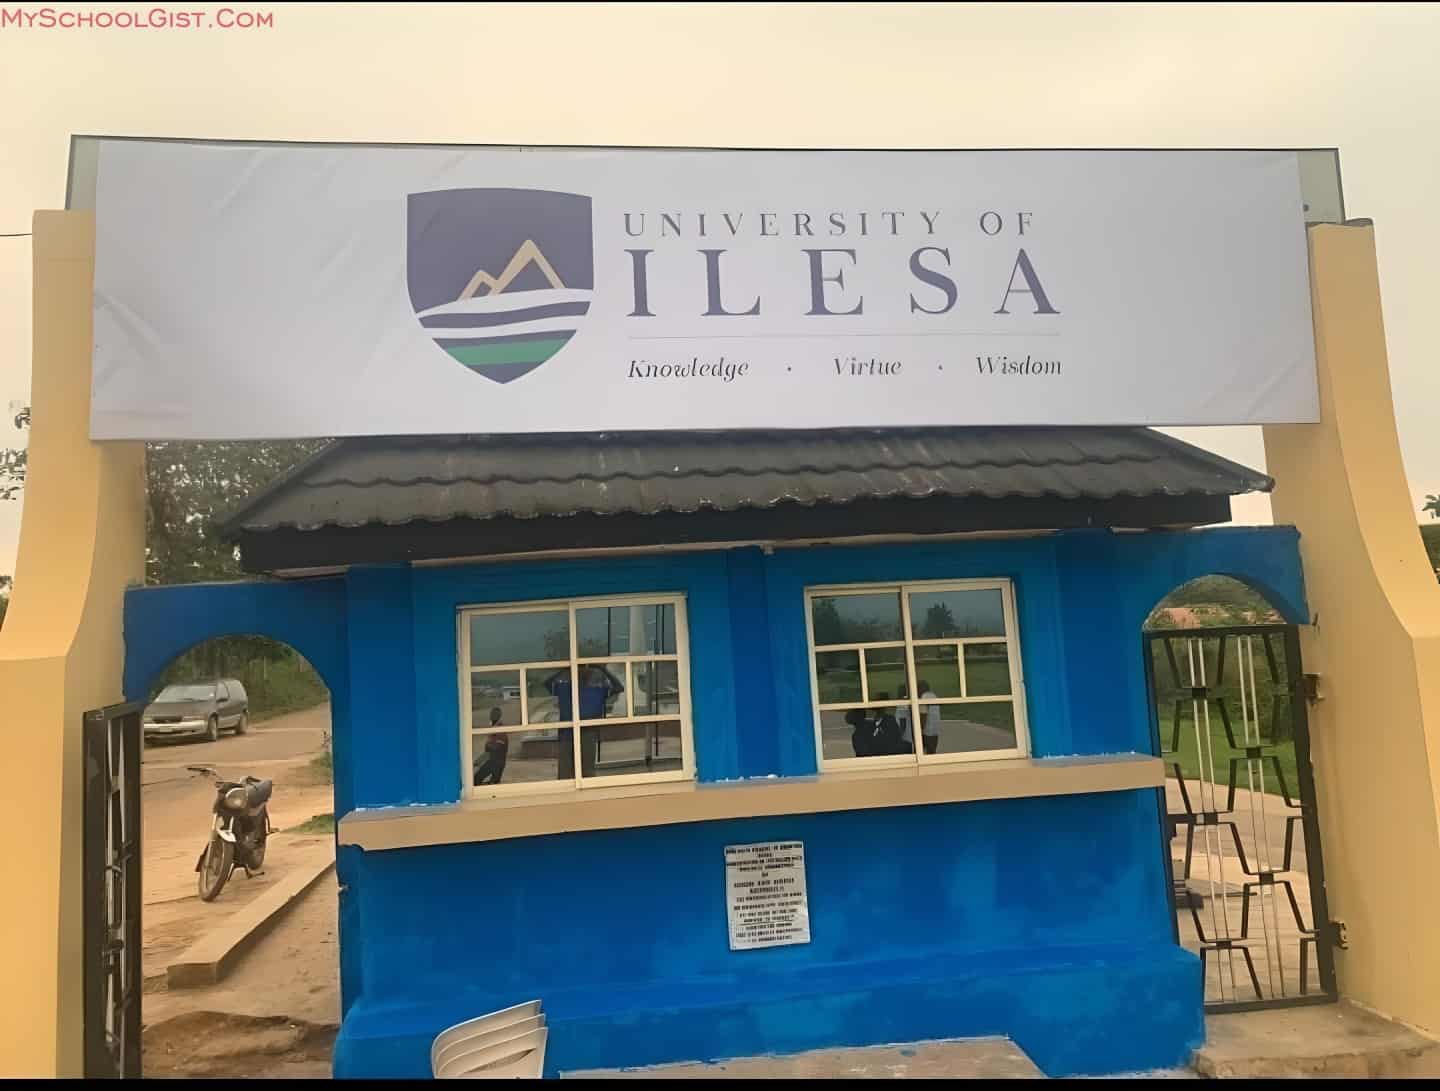 NUC Approves 32 Courses for University of Ilesa